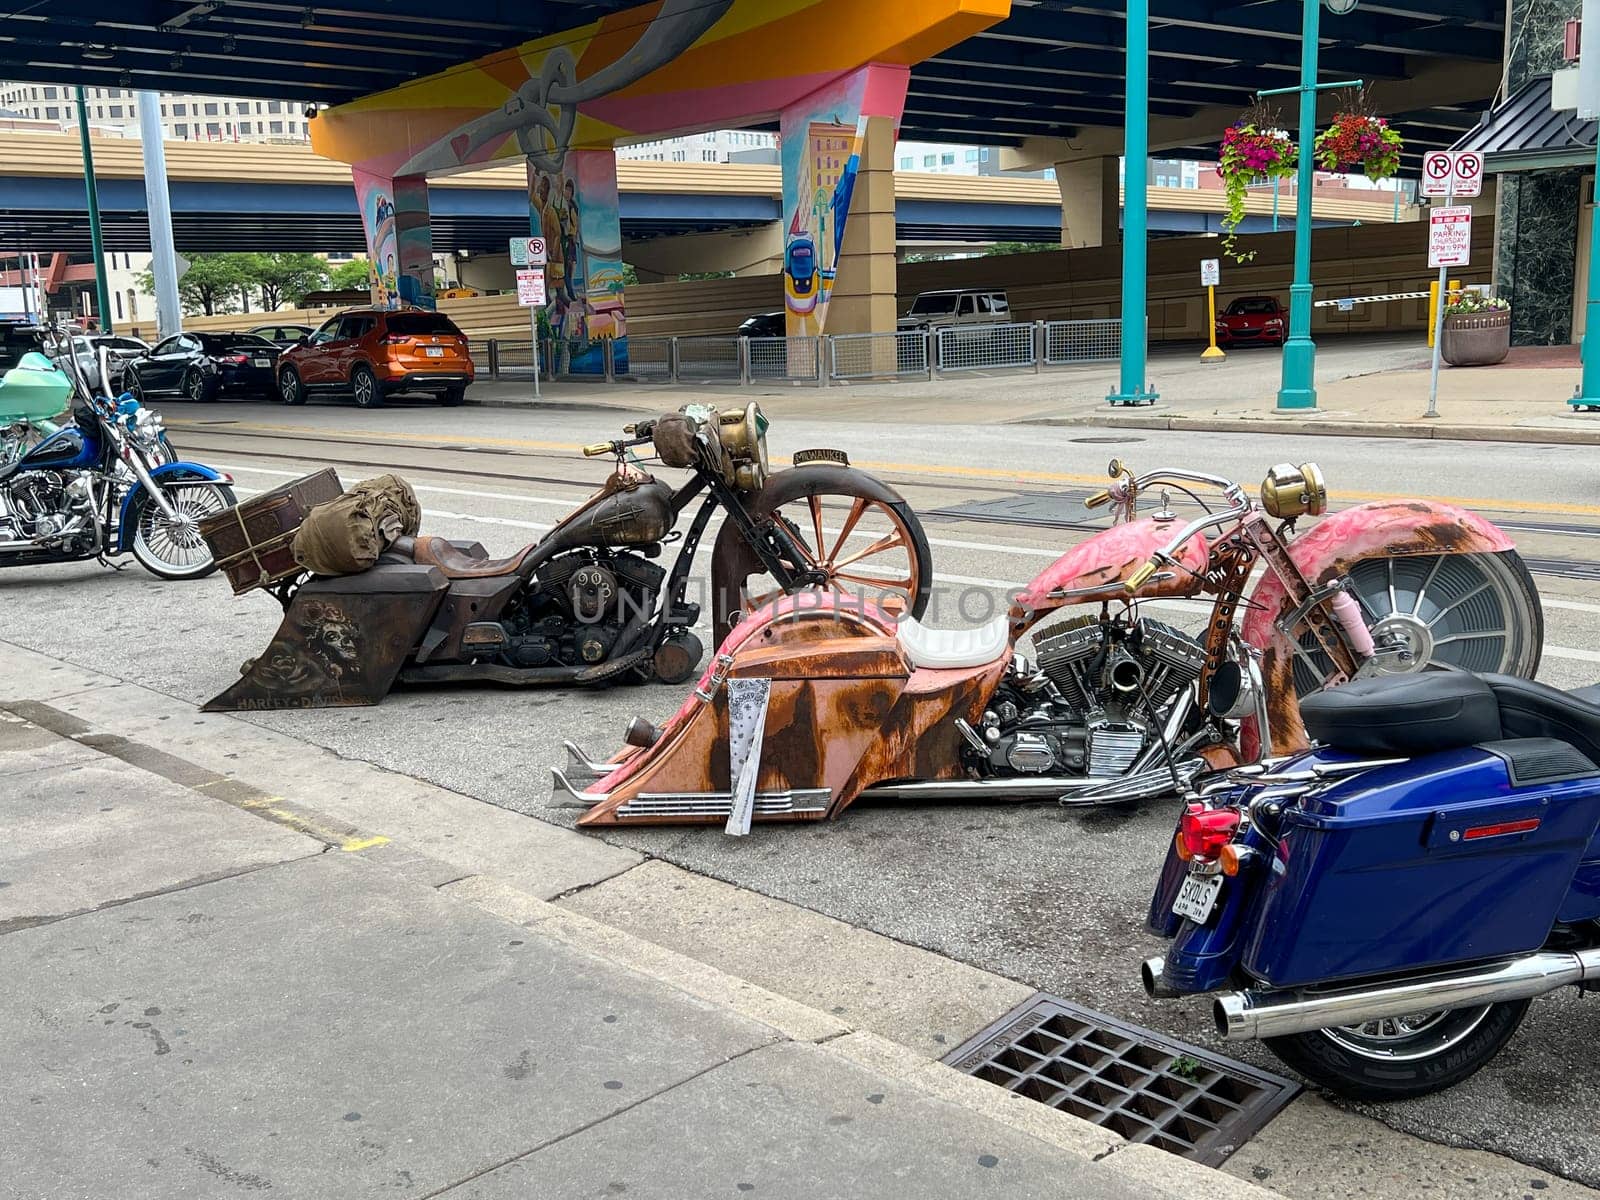 MILWAUKEE, WISCONSIN, JULY 15 2023: Downtown Milwaukee with retro customized Harley Davidsons parked outside an underpass in the city of Harley Davidson. by WeWander